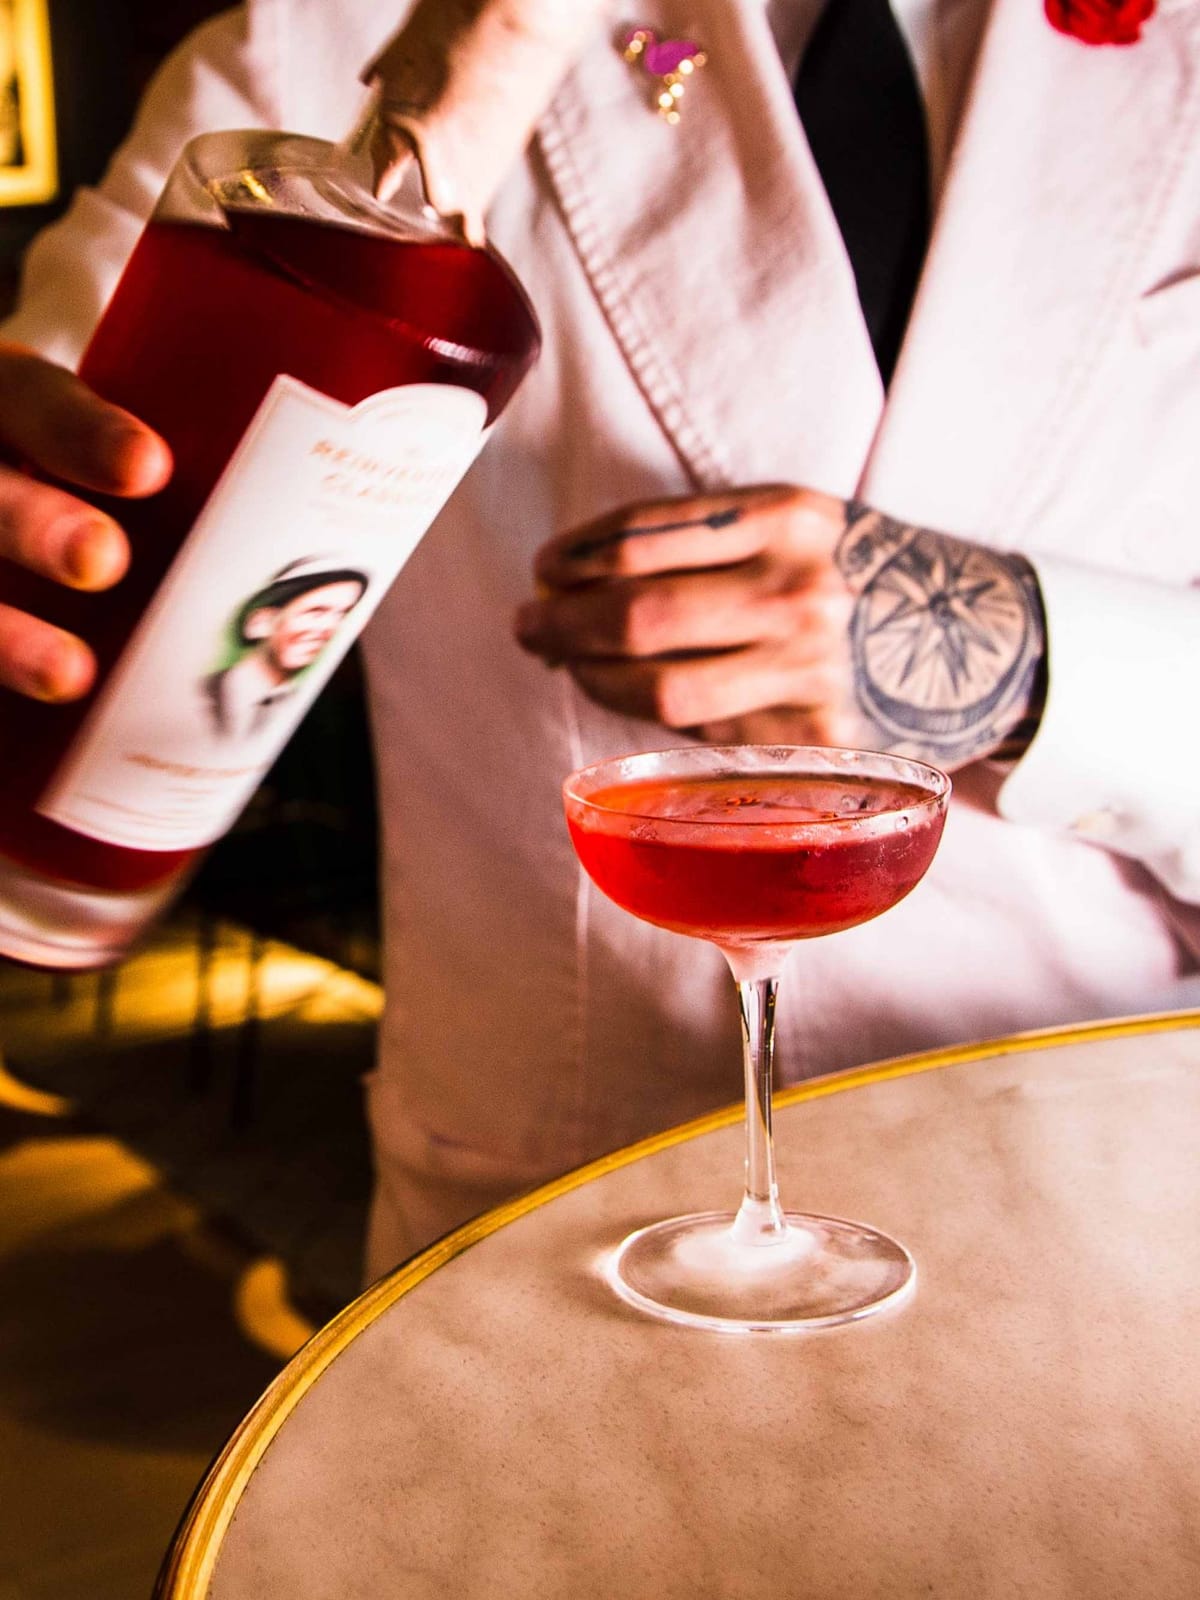 The Frank: the cocktail equivalent of loosening your tie